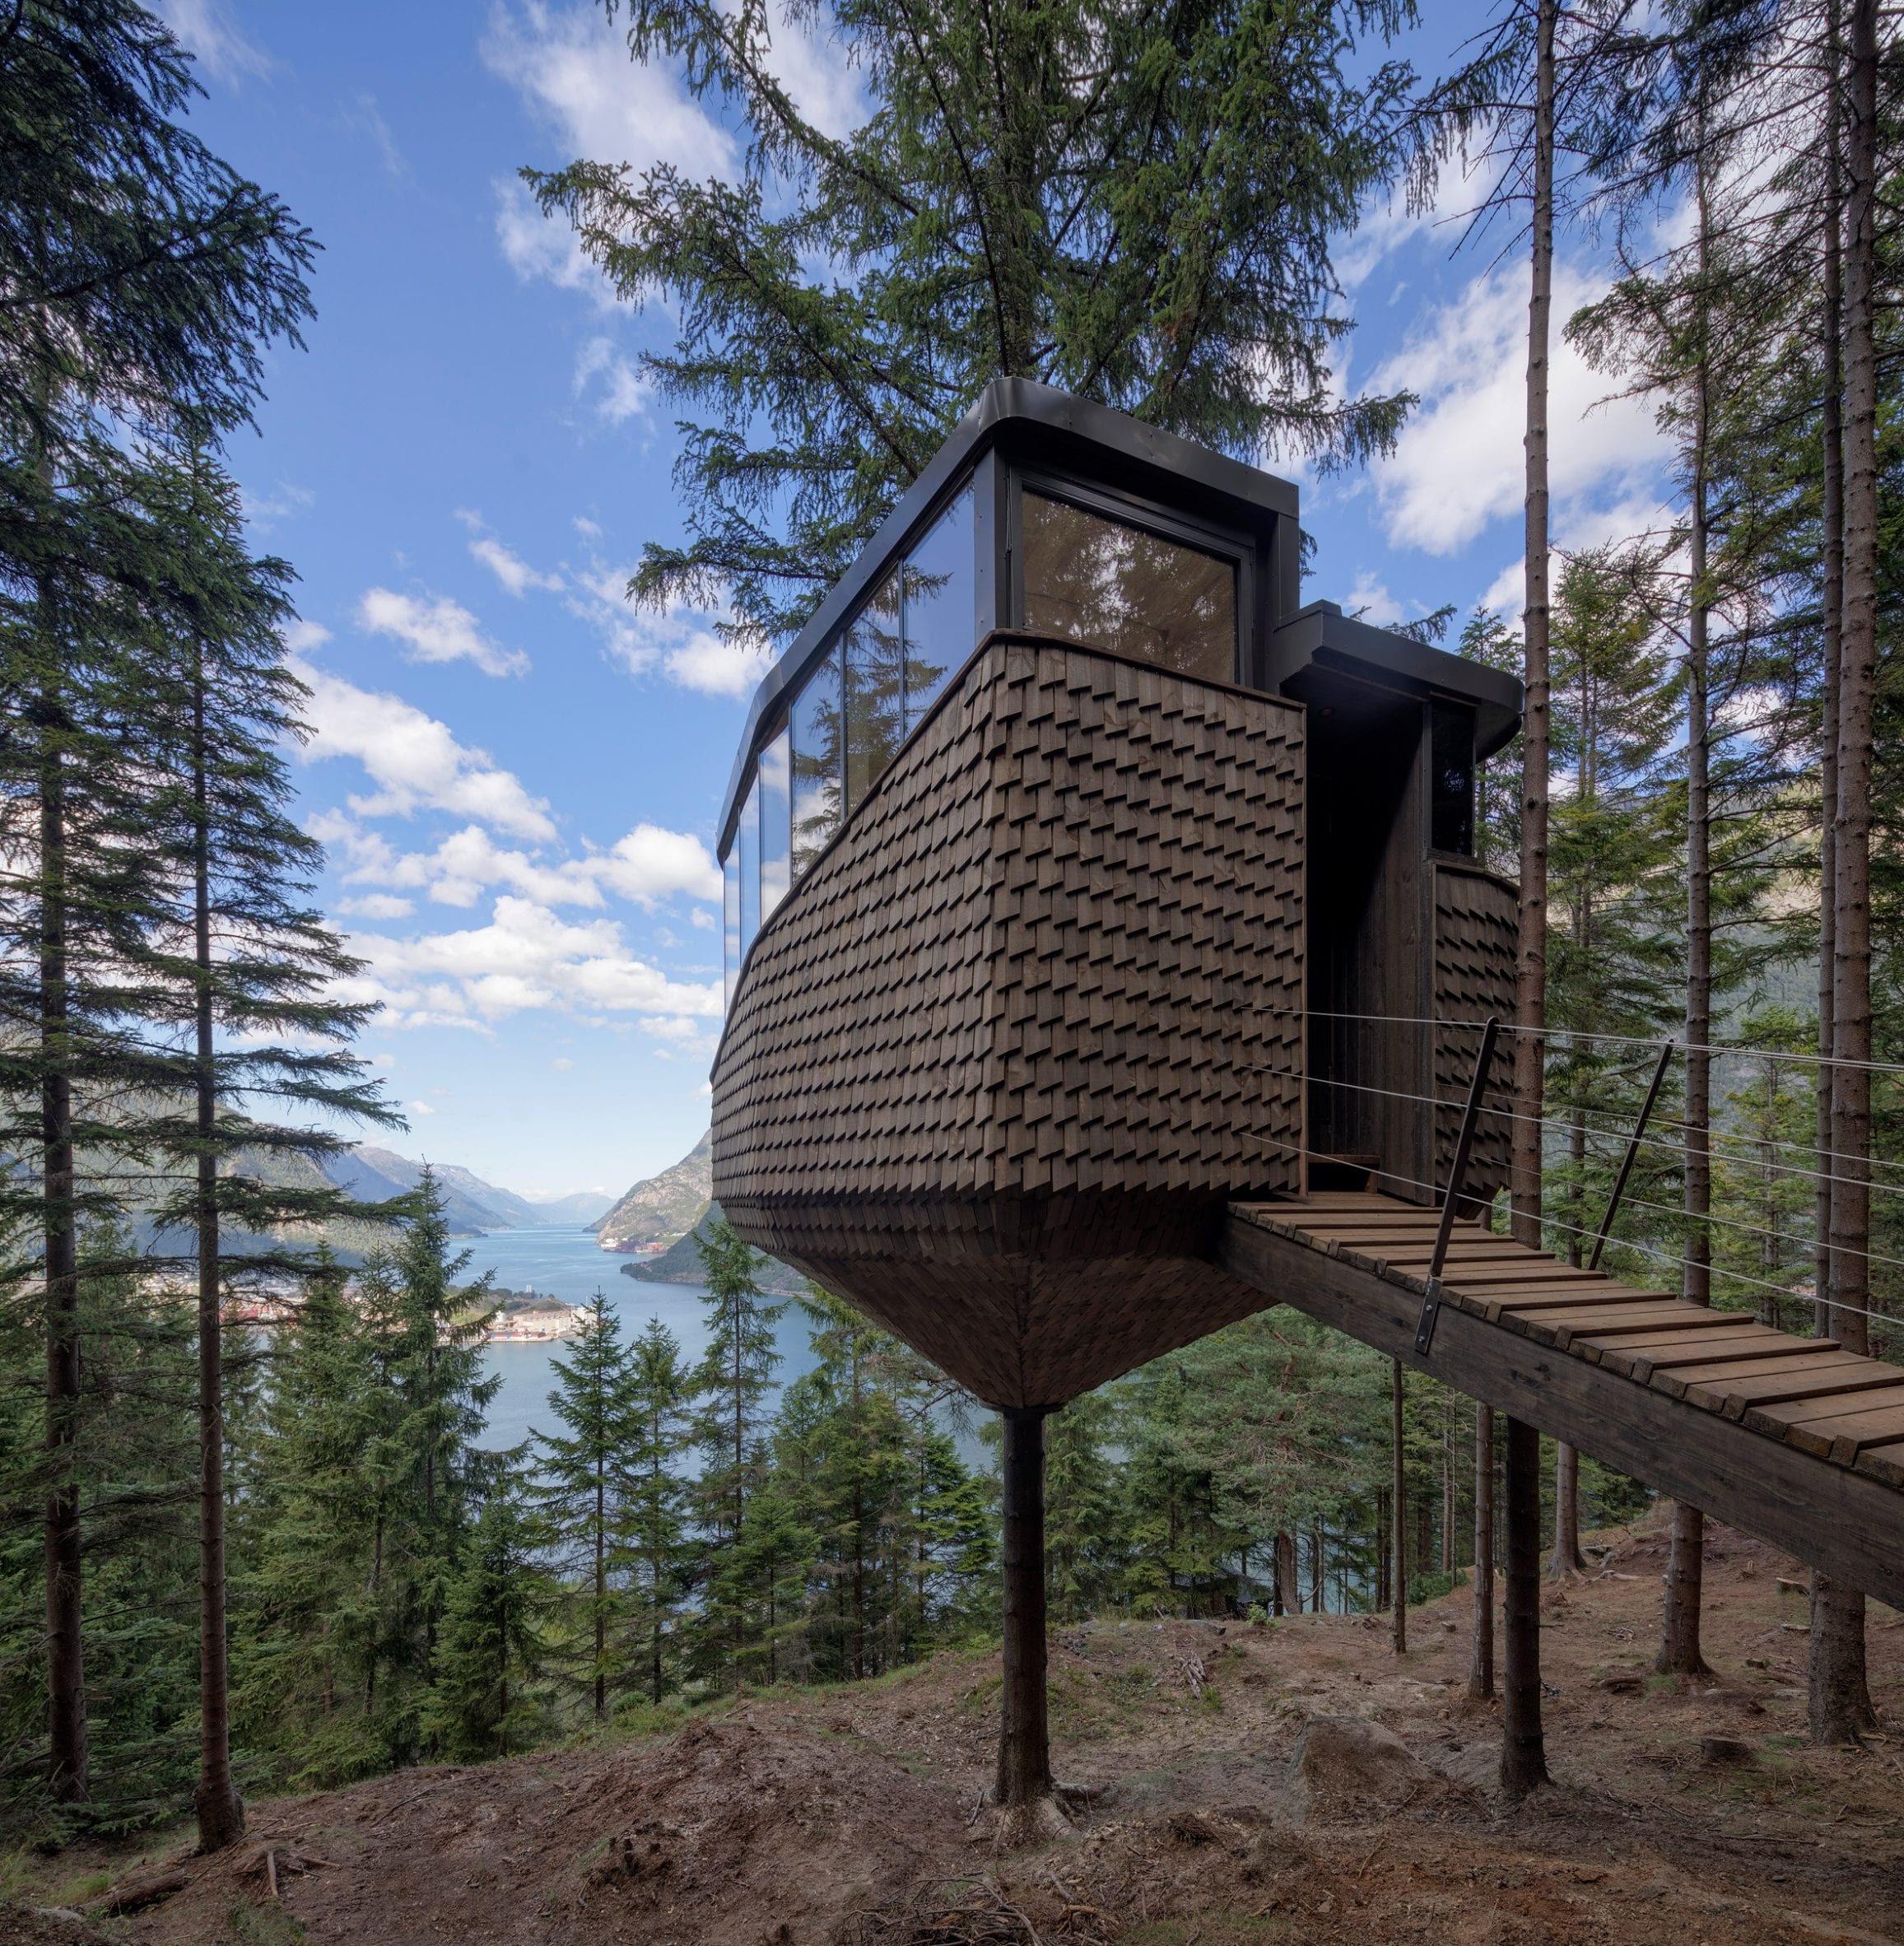 The woodnest treehouses overlook the fjord